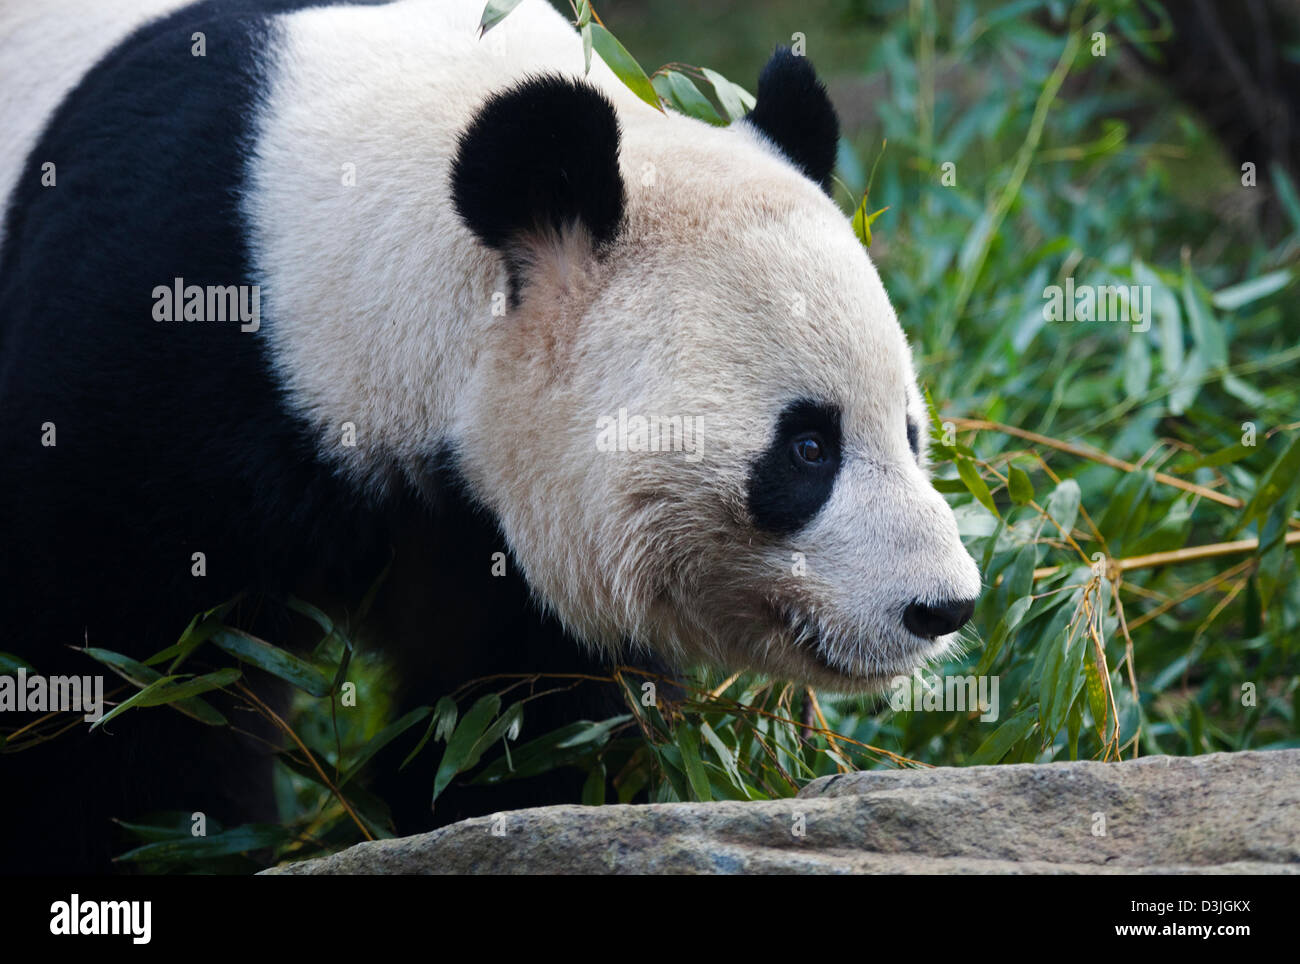 Edinburgh Zoo, Scotland, UK. 20th Feb 2013. Members of the UK Media gather at the enclosure of male panda Yang Guang 'Sunshine' while he roams back and forward scent marking, doing hand stands against walls and peering through the closed wire mesh opening which separates him from Tian Tian 'Sweetie'. According to zoo staff the pair are showing encouraging signs that they are ready to mate and it is hoped that this will occur within the next few weeks. Yang Guang normally eats 35kg of food per day, currently he is eating 50kg mainly bamboo. Stock Photo